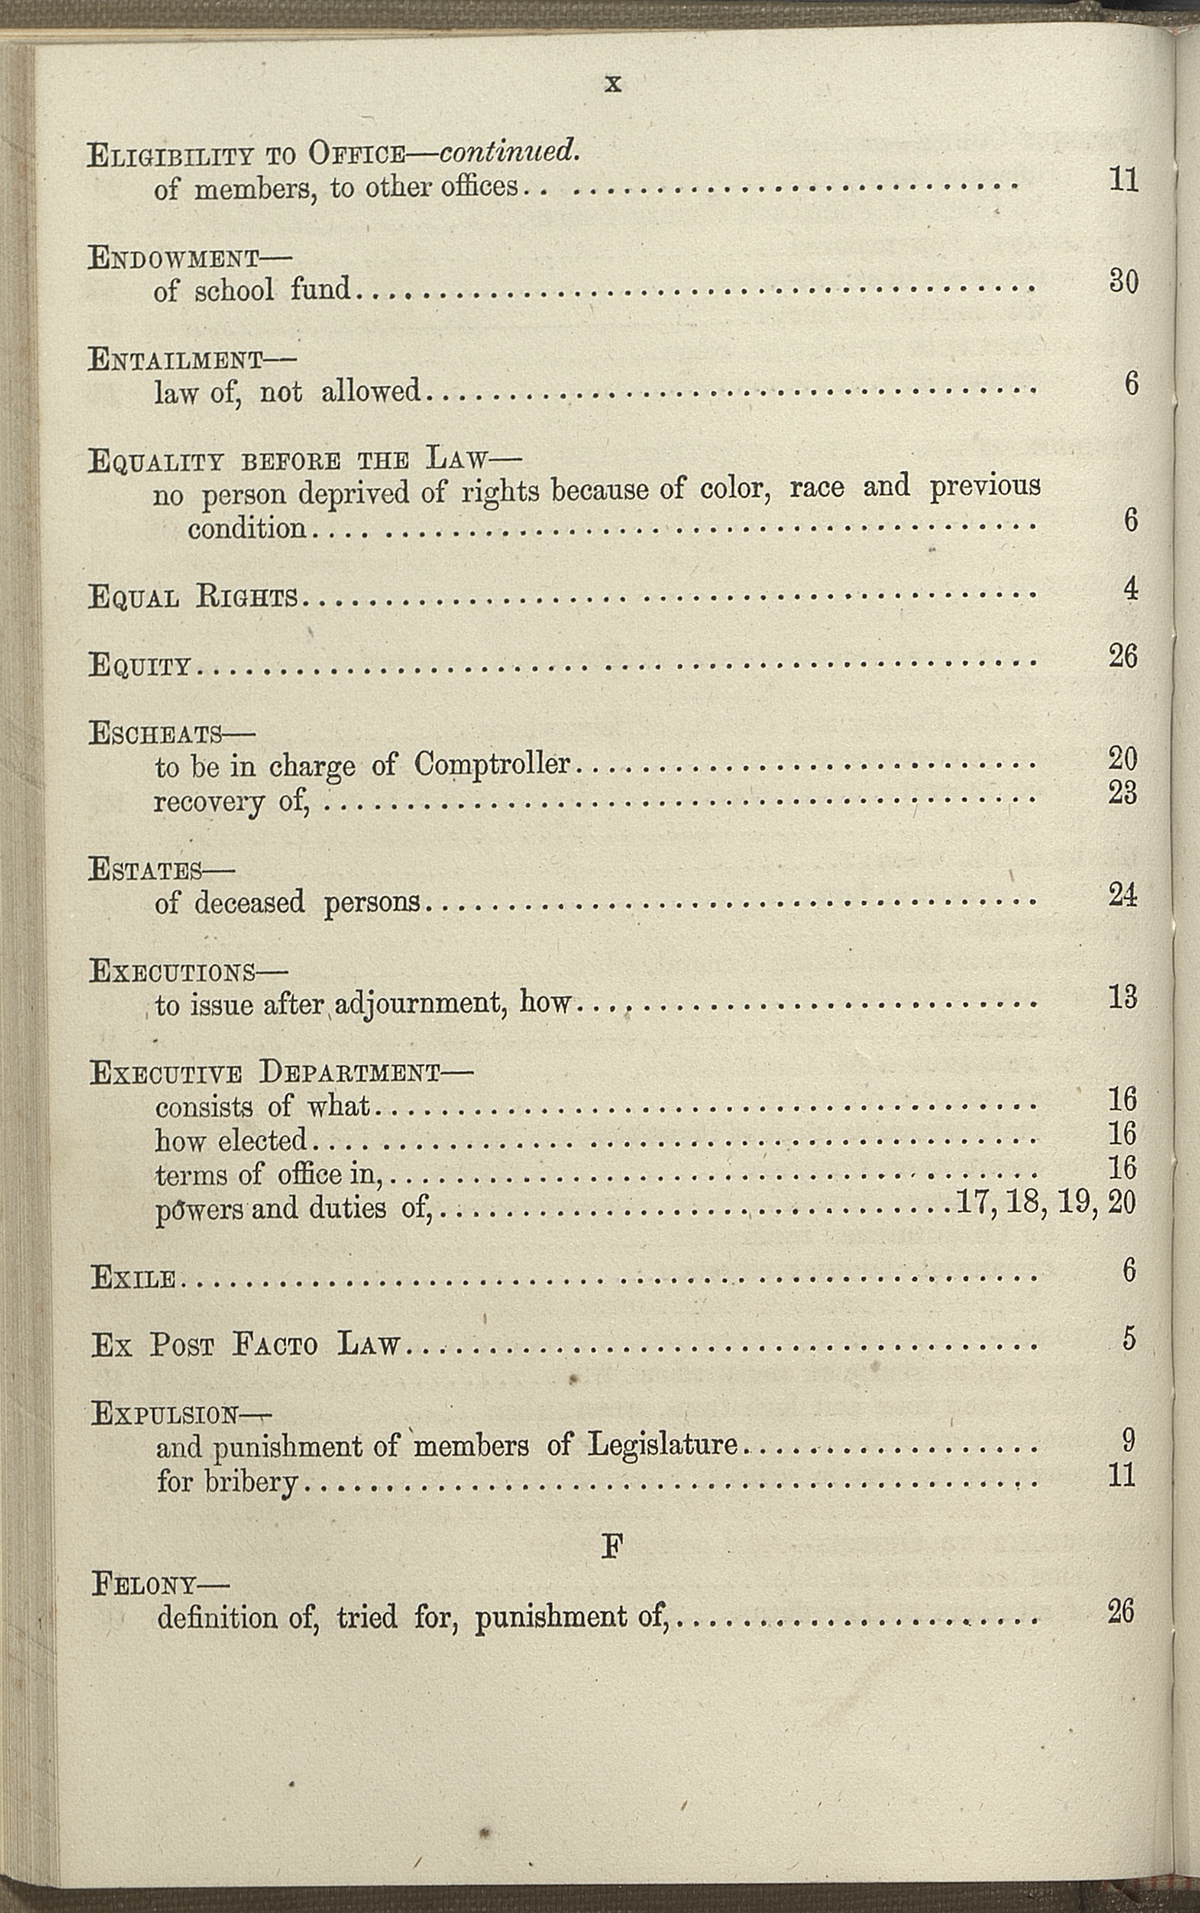 page 10 - 1869 index